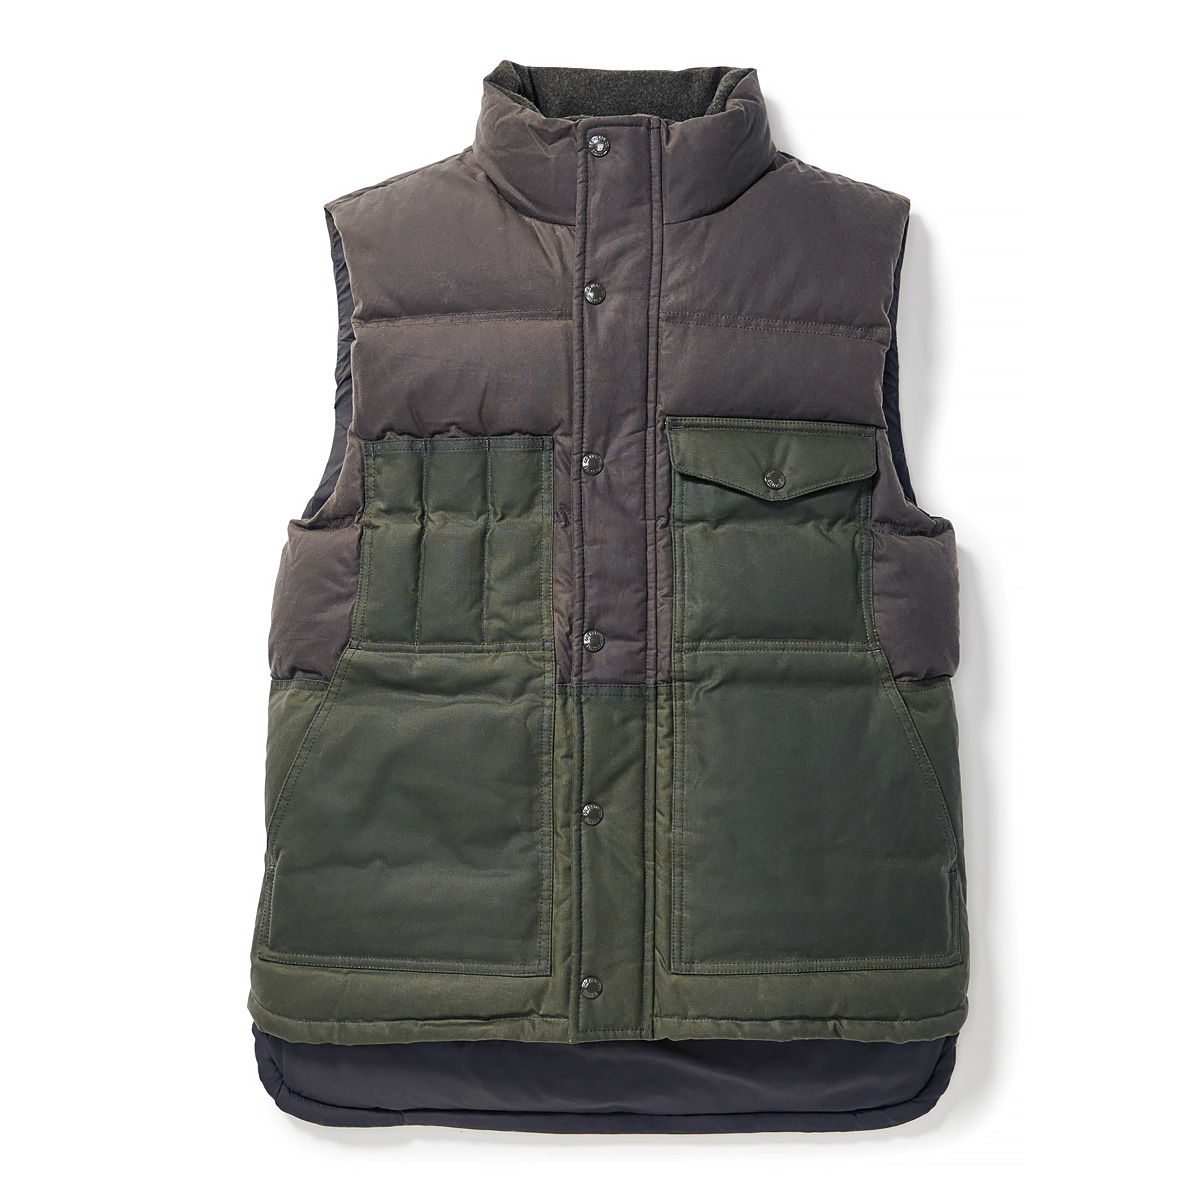 Filson Down Cruiser Vest Otter Green, an exceptionally warm and 